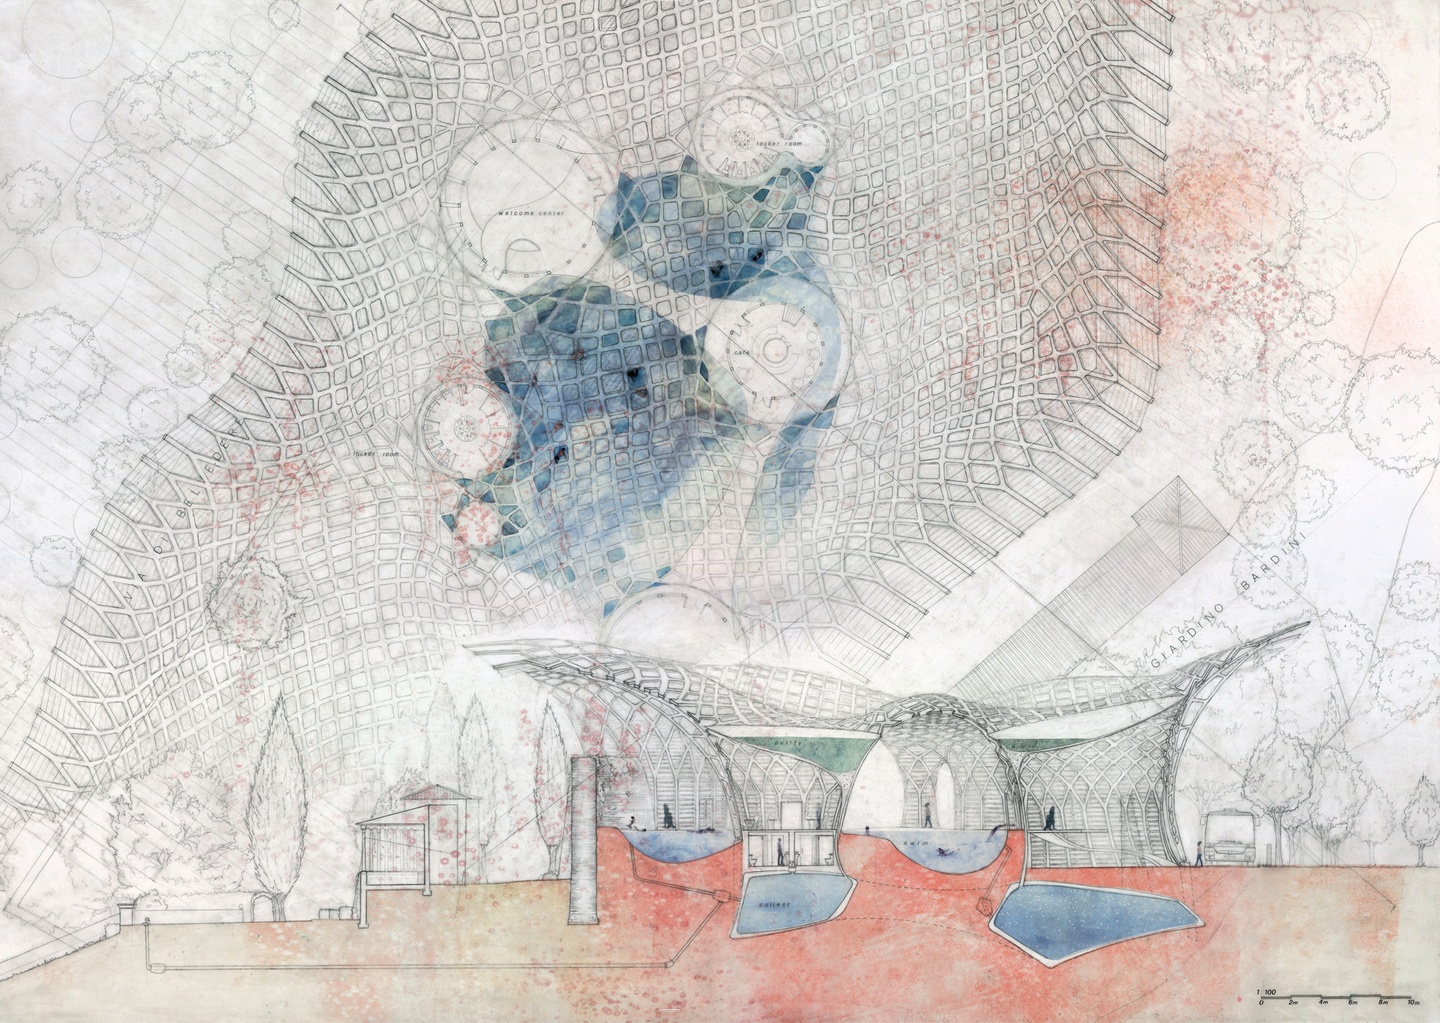 Delicate watercolor section drawing and site plan rendered in pale blues, pinks, and beige that depicts a graceful pavilion and water features.